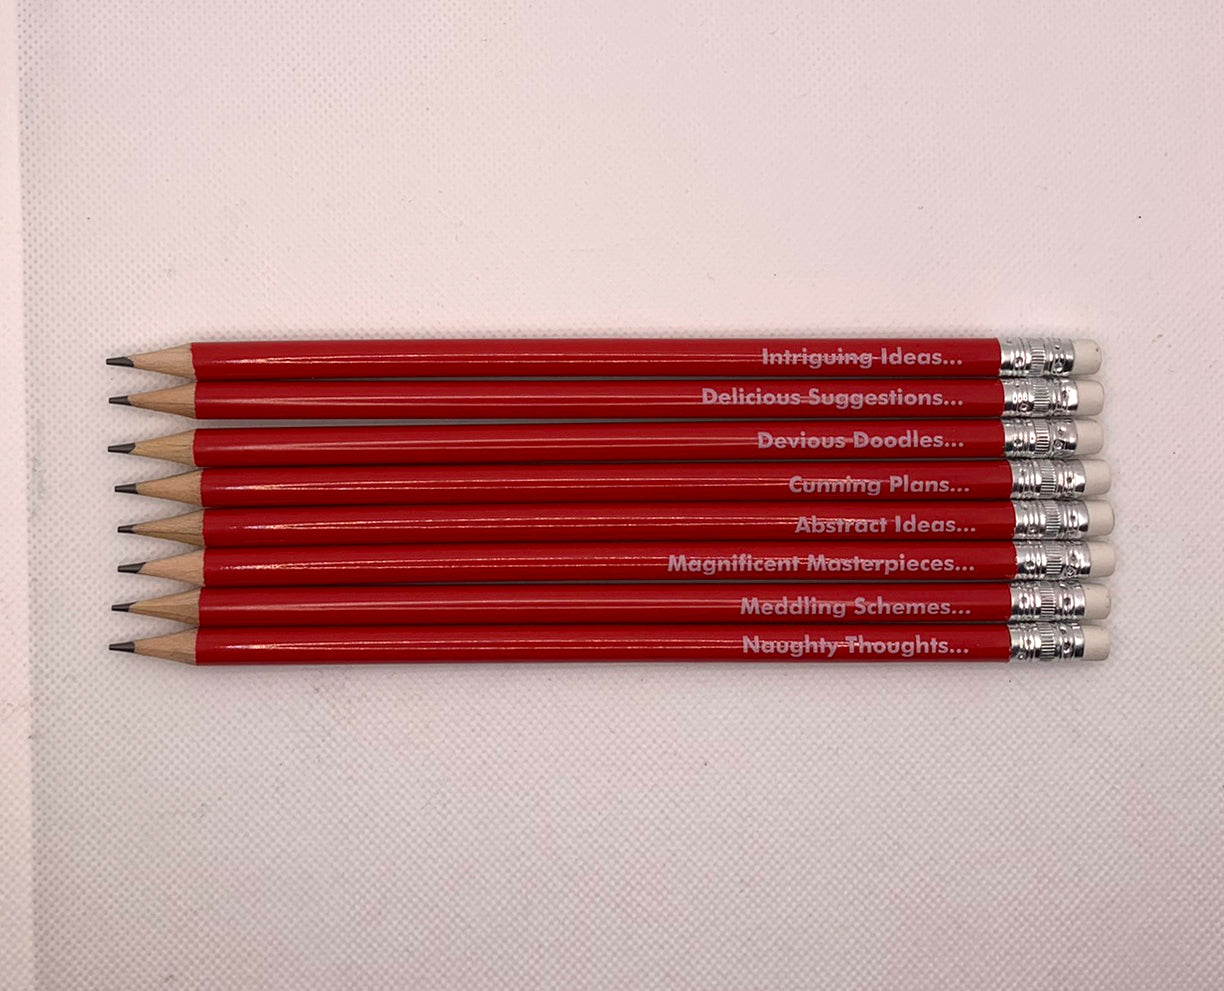 Number Ninety Five, Pencils for Plotting, 8 sharpened red pencils with white rubber tips, with phases such as, Magnificent Masterpieces, Abstract Ideas, Cunning Plans and Delicious Suggestions written on them in white text.